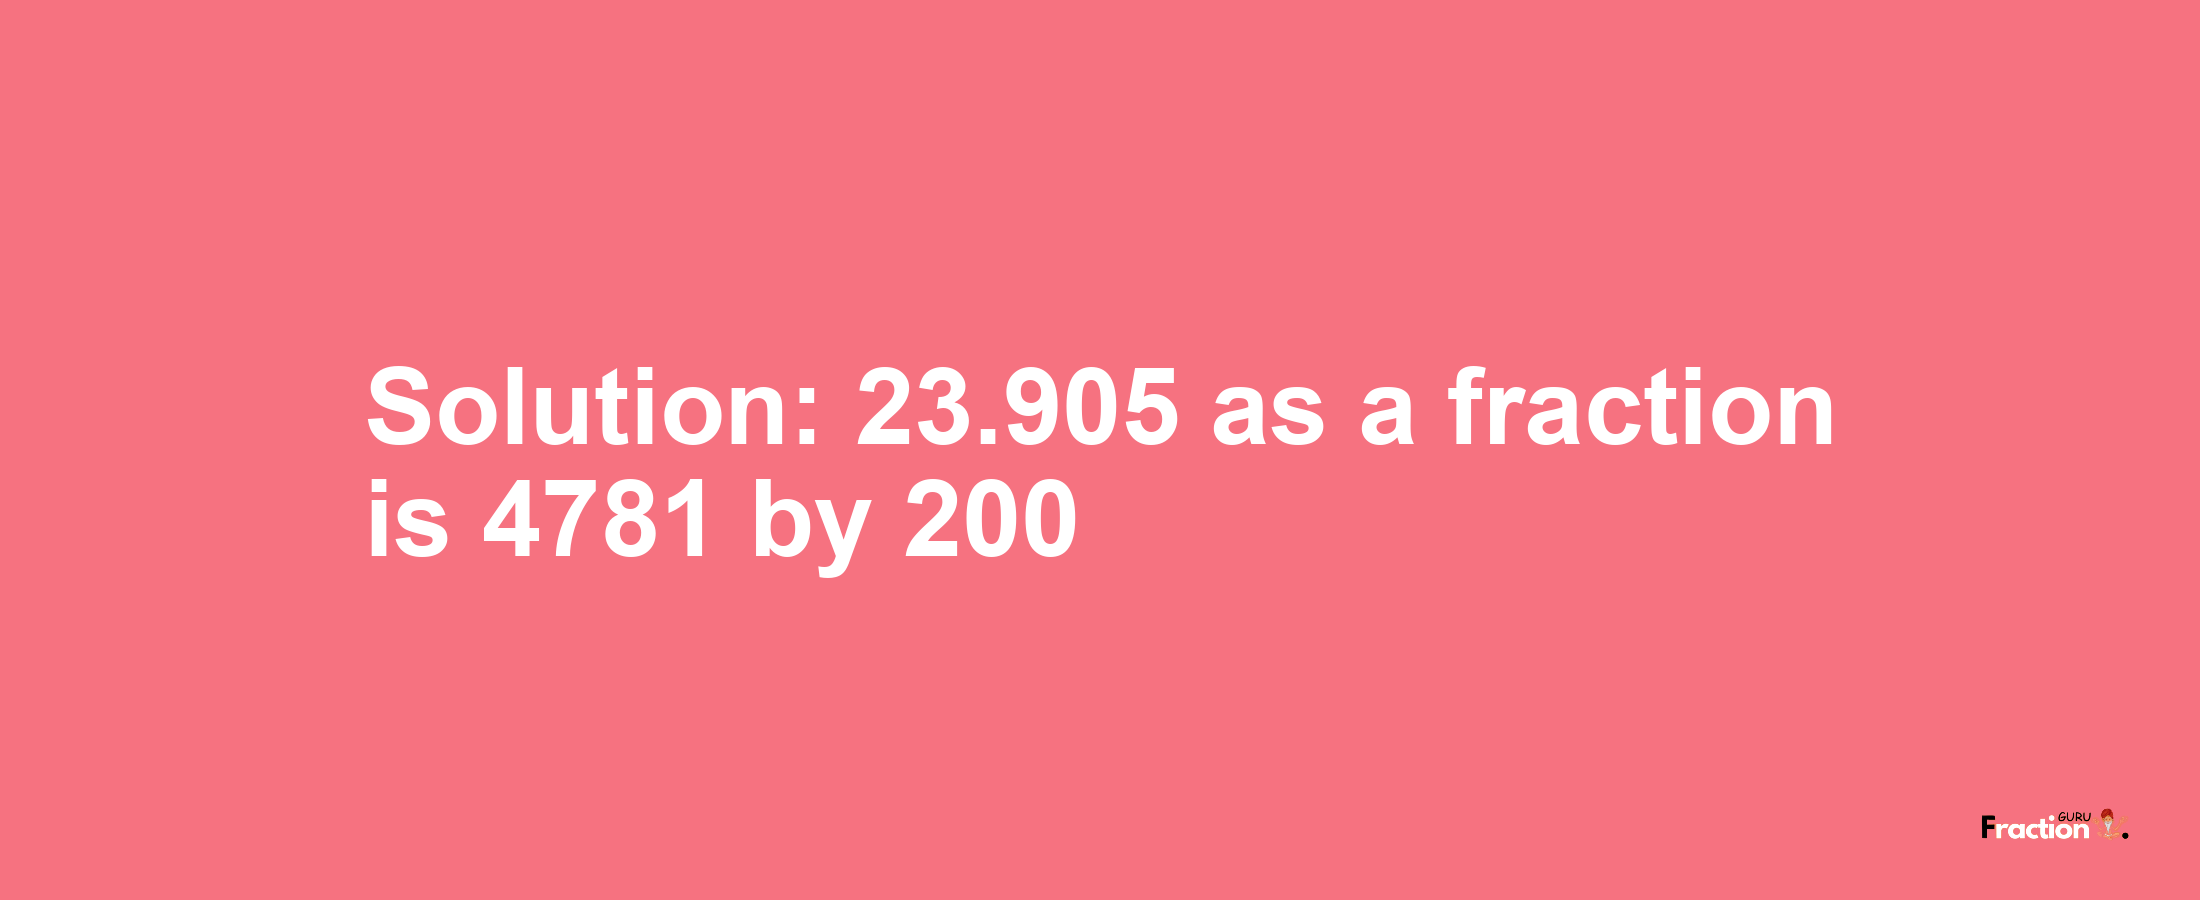 Solution:23.905 as a fraction is 4781/200